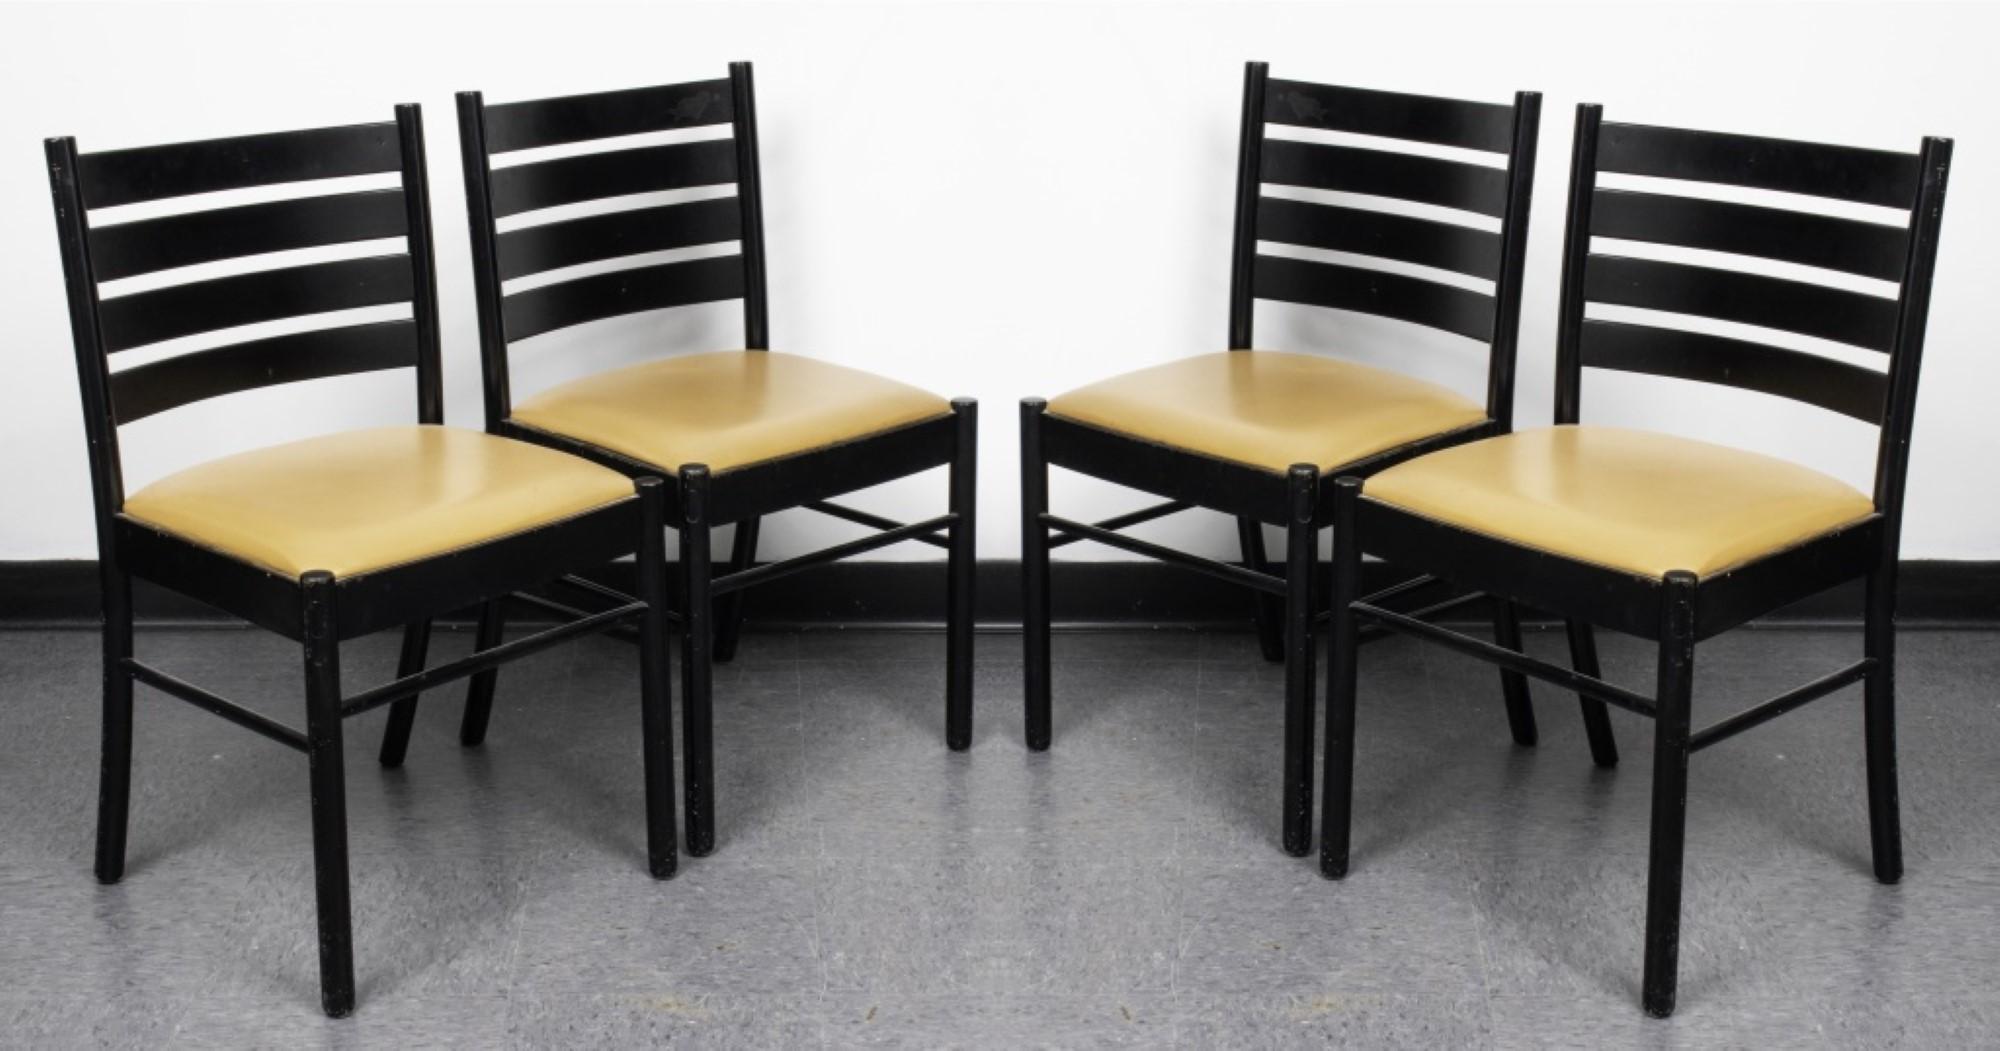 Atelier Intl Modern Ladderback Side Chairs, 4 In Good Condition For Sale In New York, NY